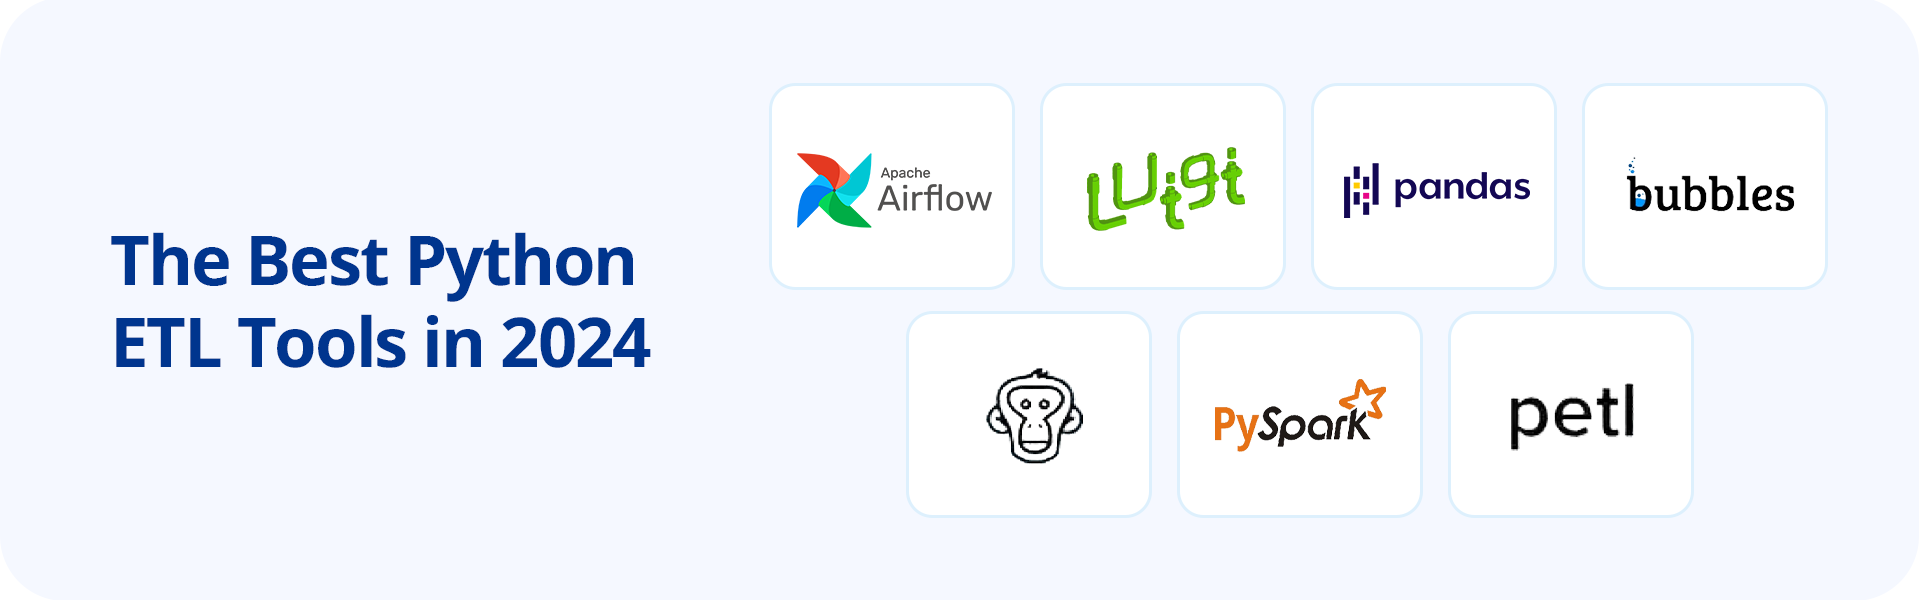 An image depicting the top tools for Python ETL in 2024